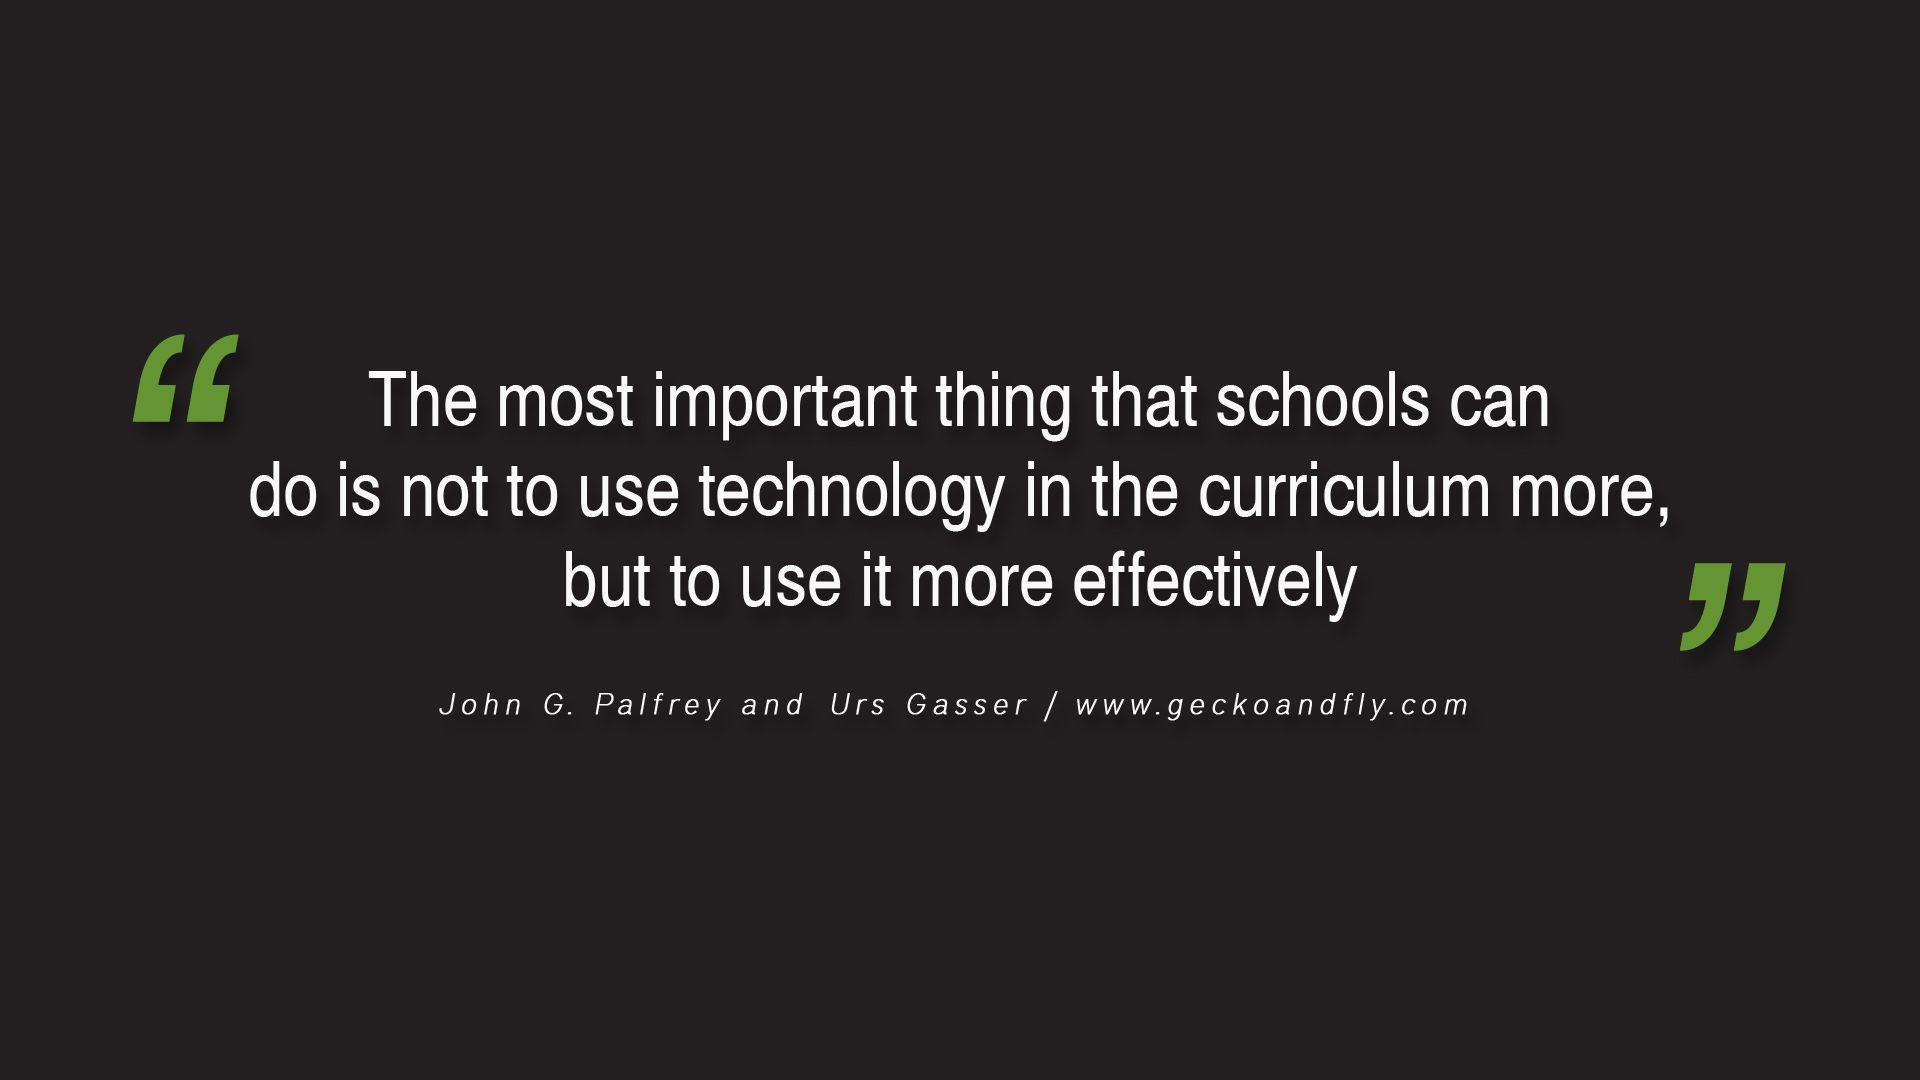 Educational Technology Quotes
 The most important thing that schools can do is not to use